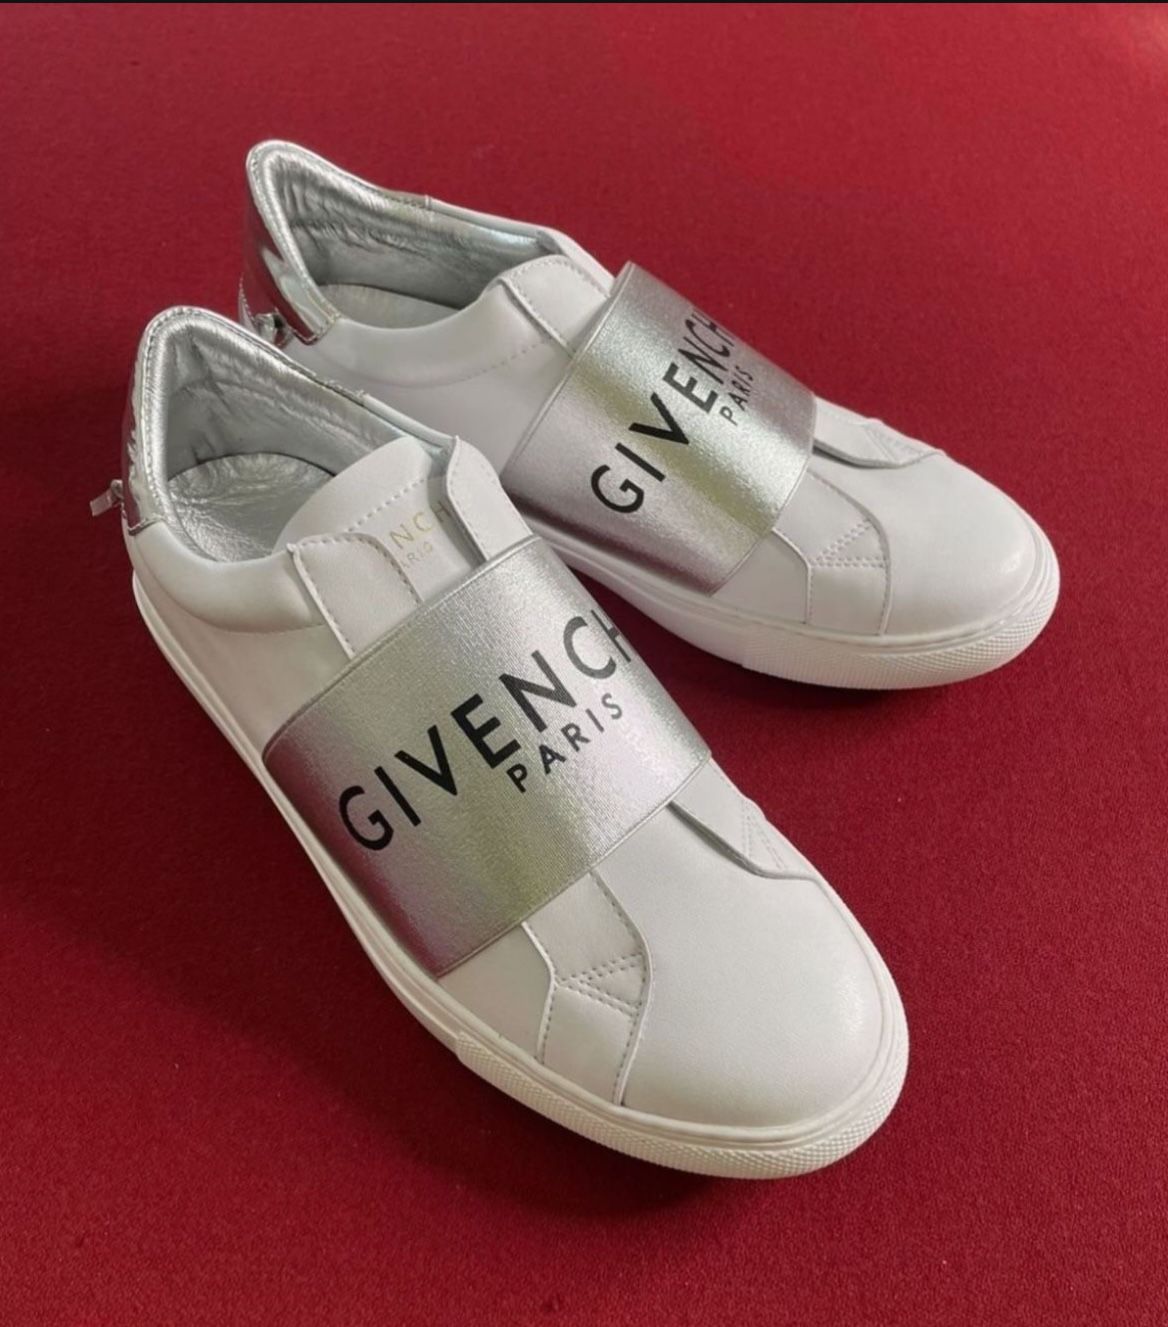 New Givenchy Sneakers for Sale in Aventura, FL - OfferUp